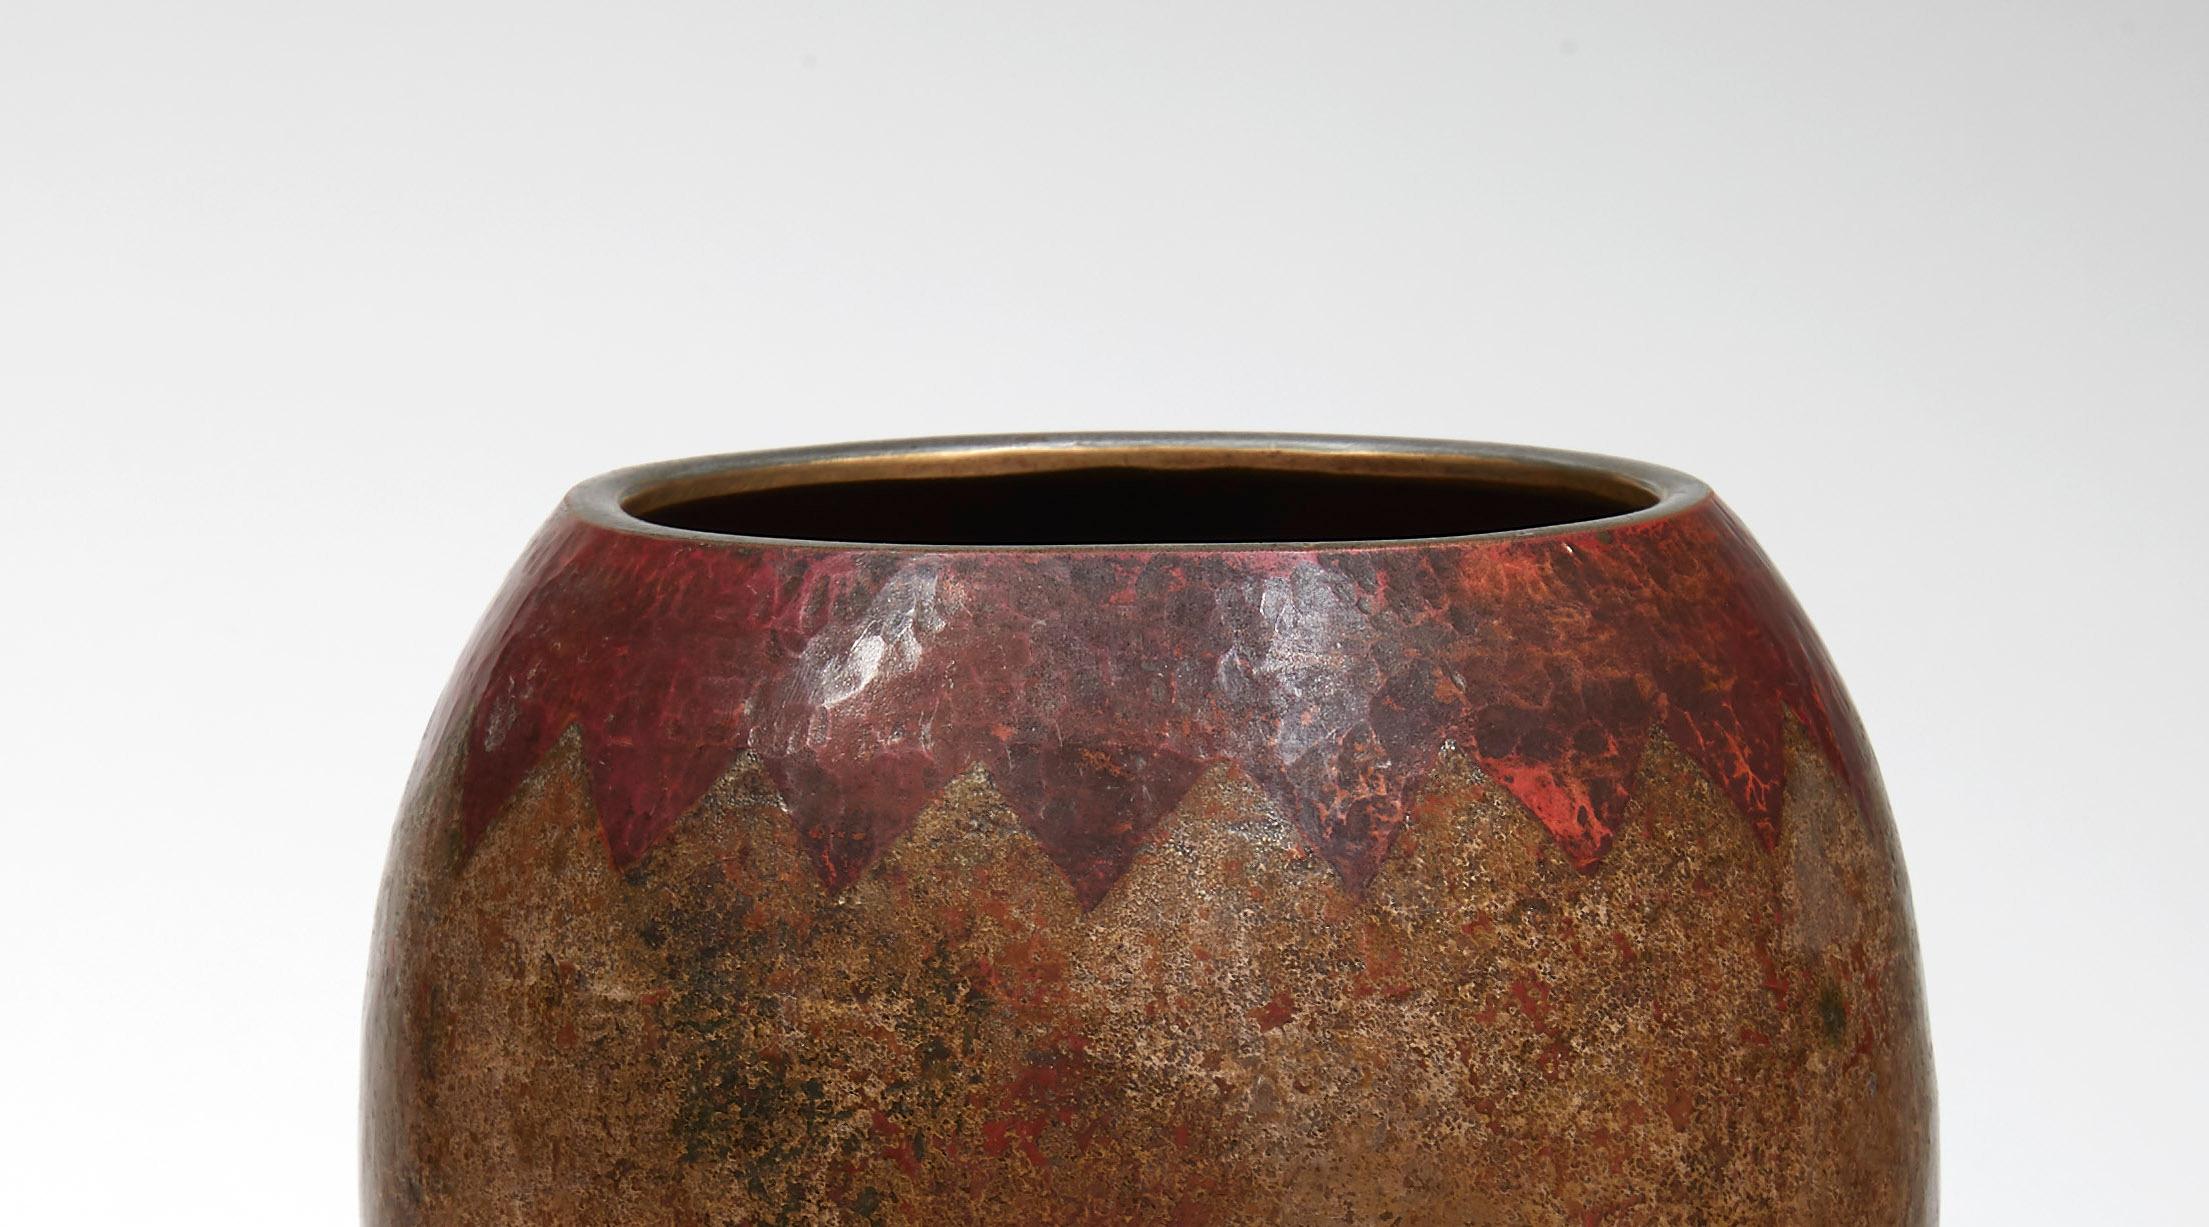 Egg-shaped vase with in copperware with a moiré patina and herringbone frieze decor on a red background. Signed and dated 1943 under the base.